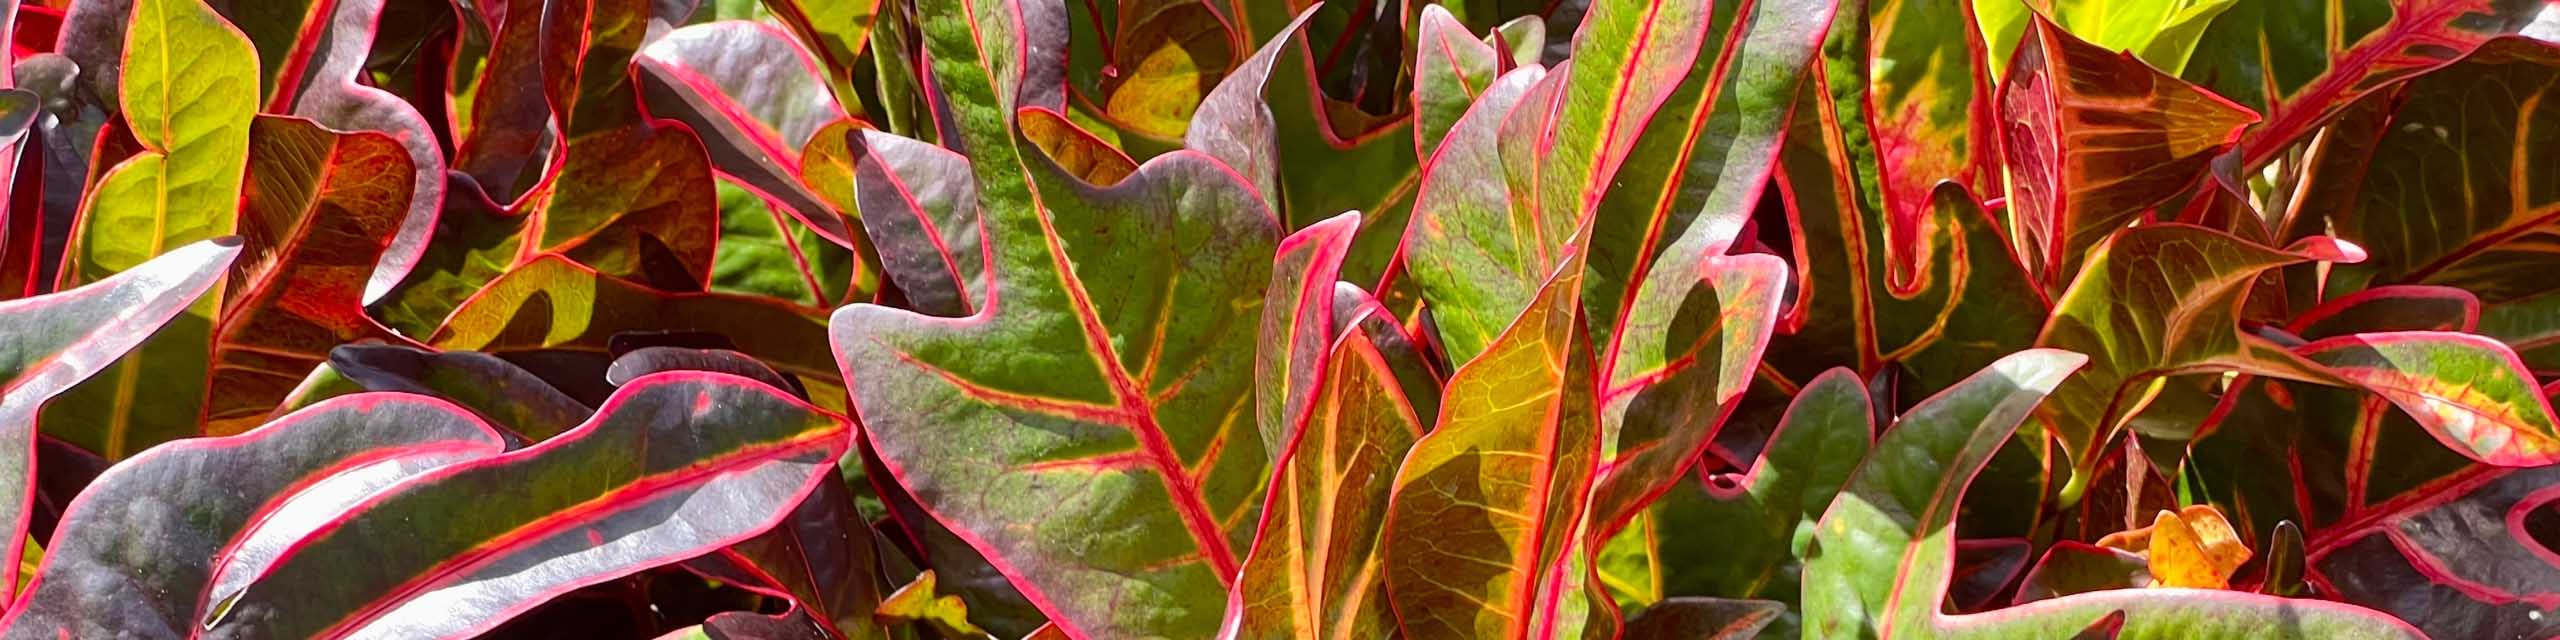 Multicolored leaves of of various types of croton plants.